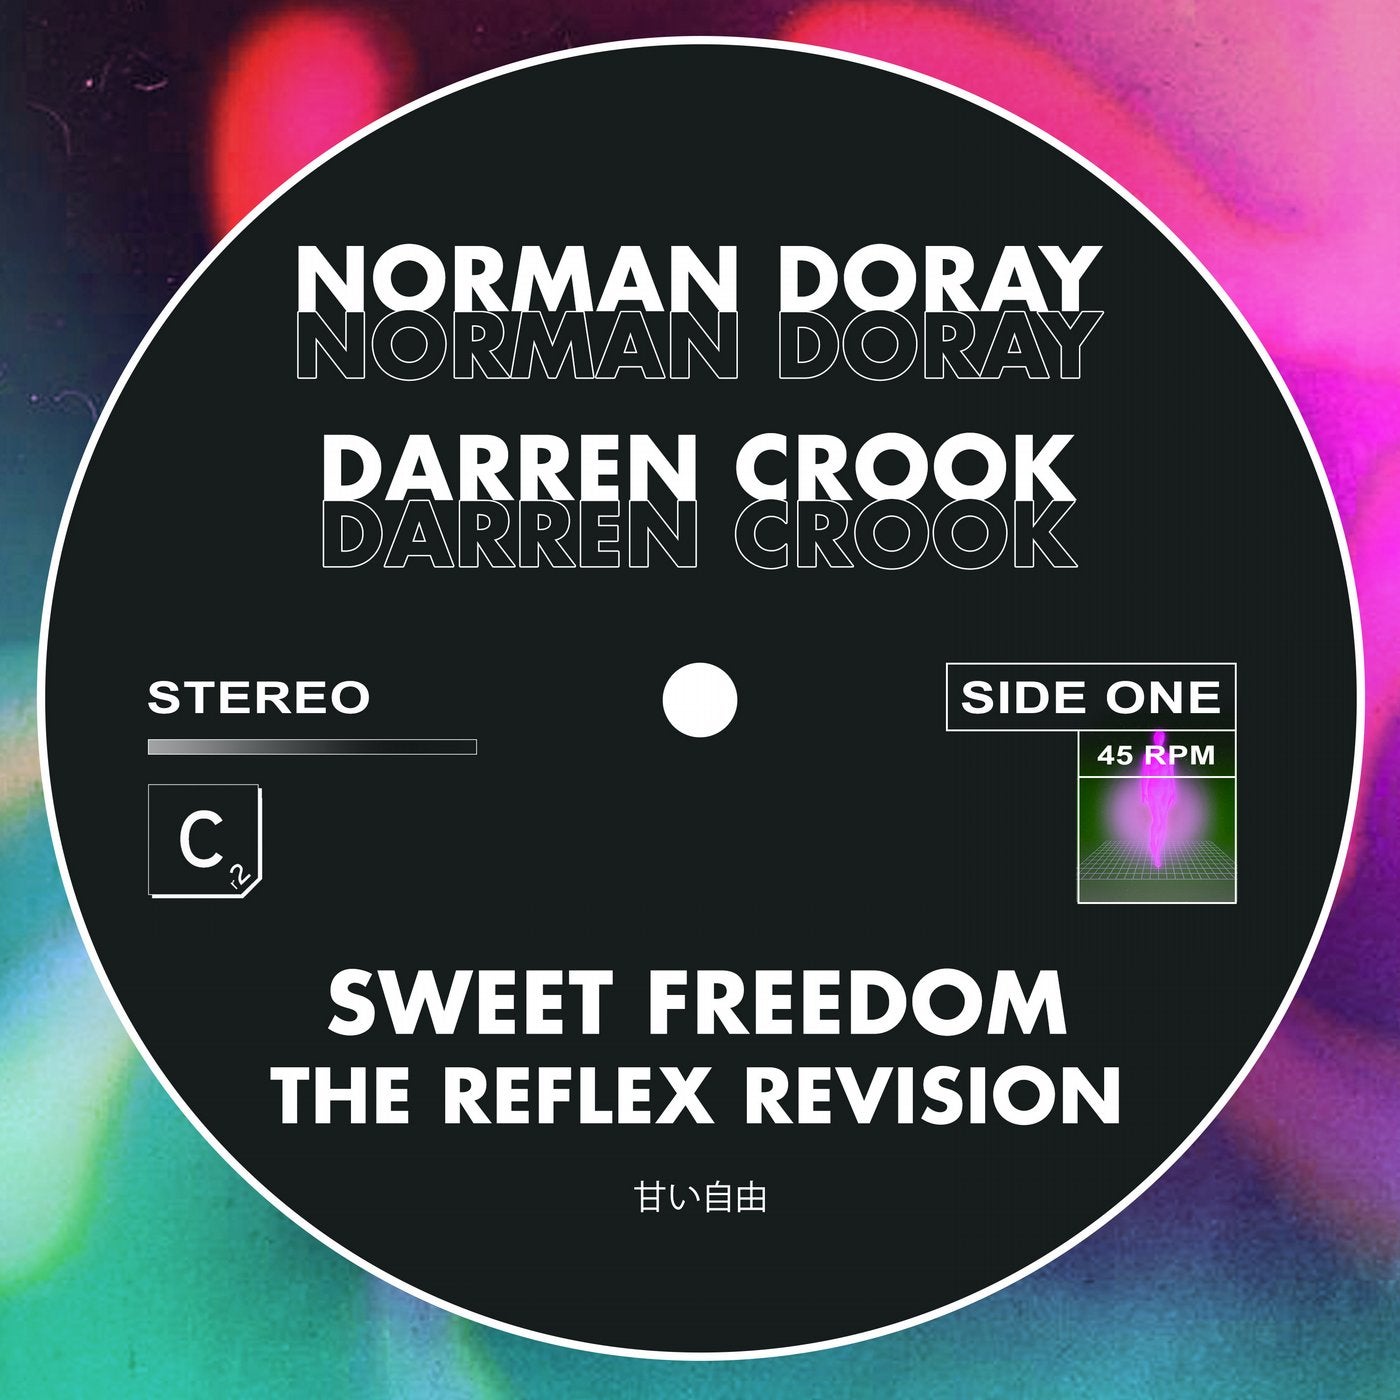 Sweet Freedom - The Reflex Revision